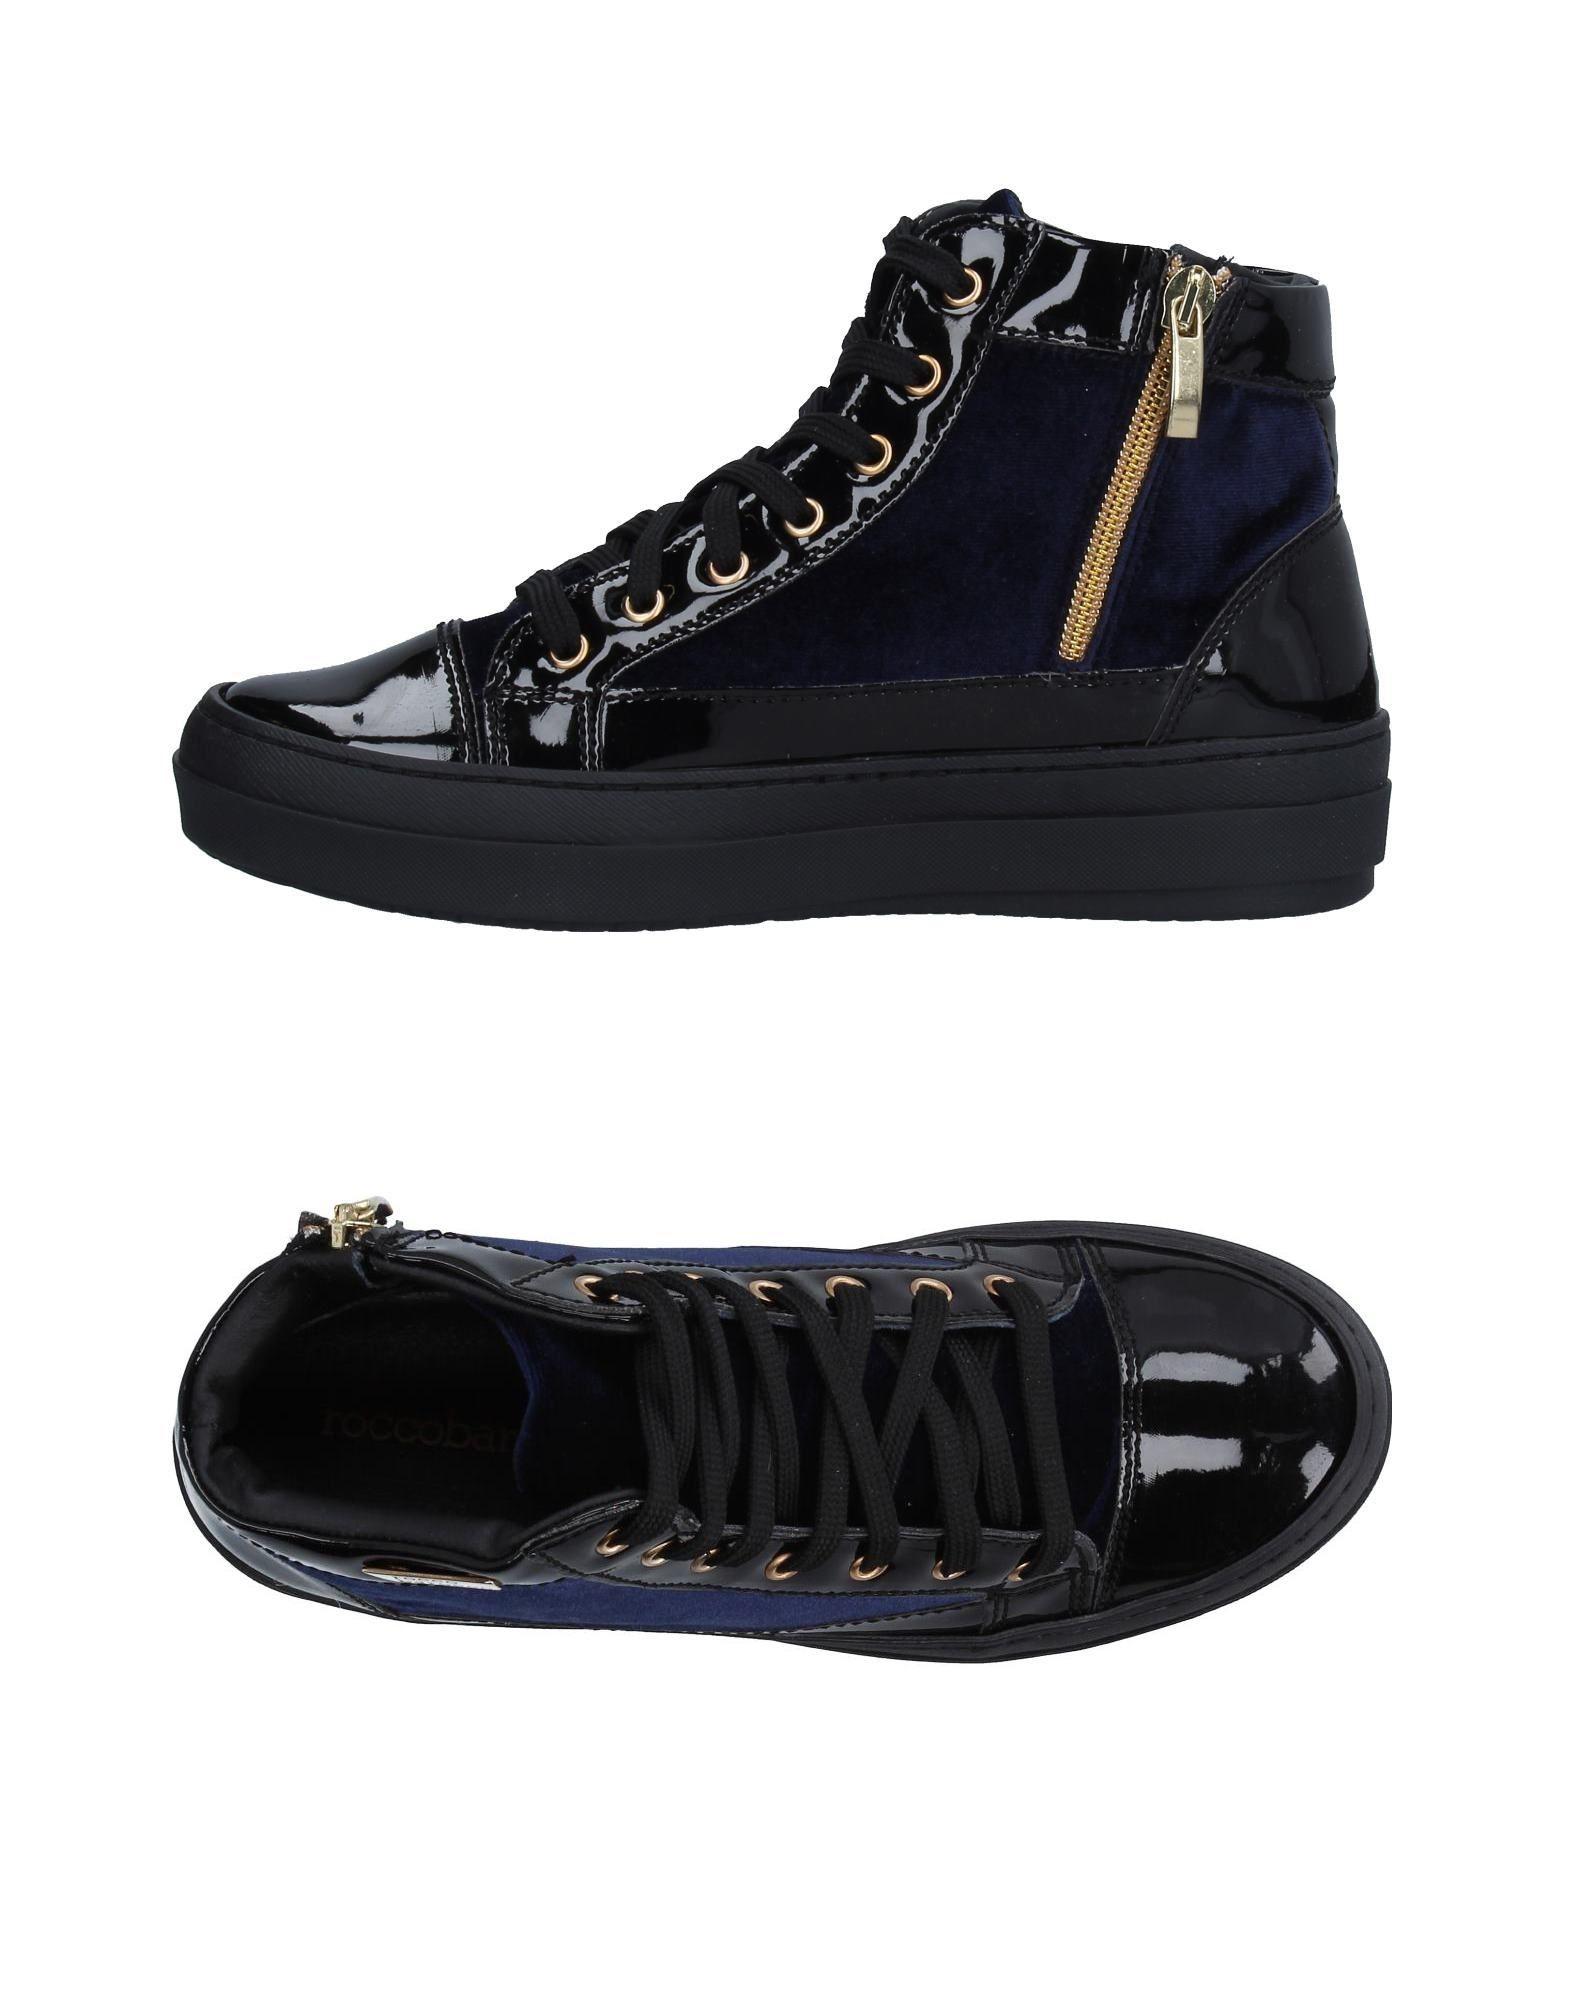 Roccobarocco Leather High Tops Sneakers In Dark Blue Blue For Men Lyst